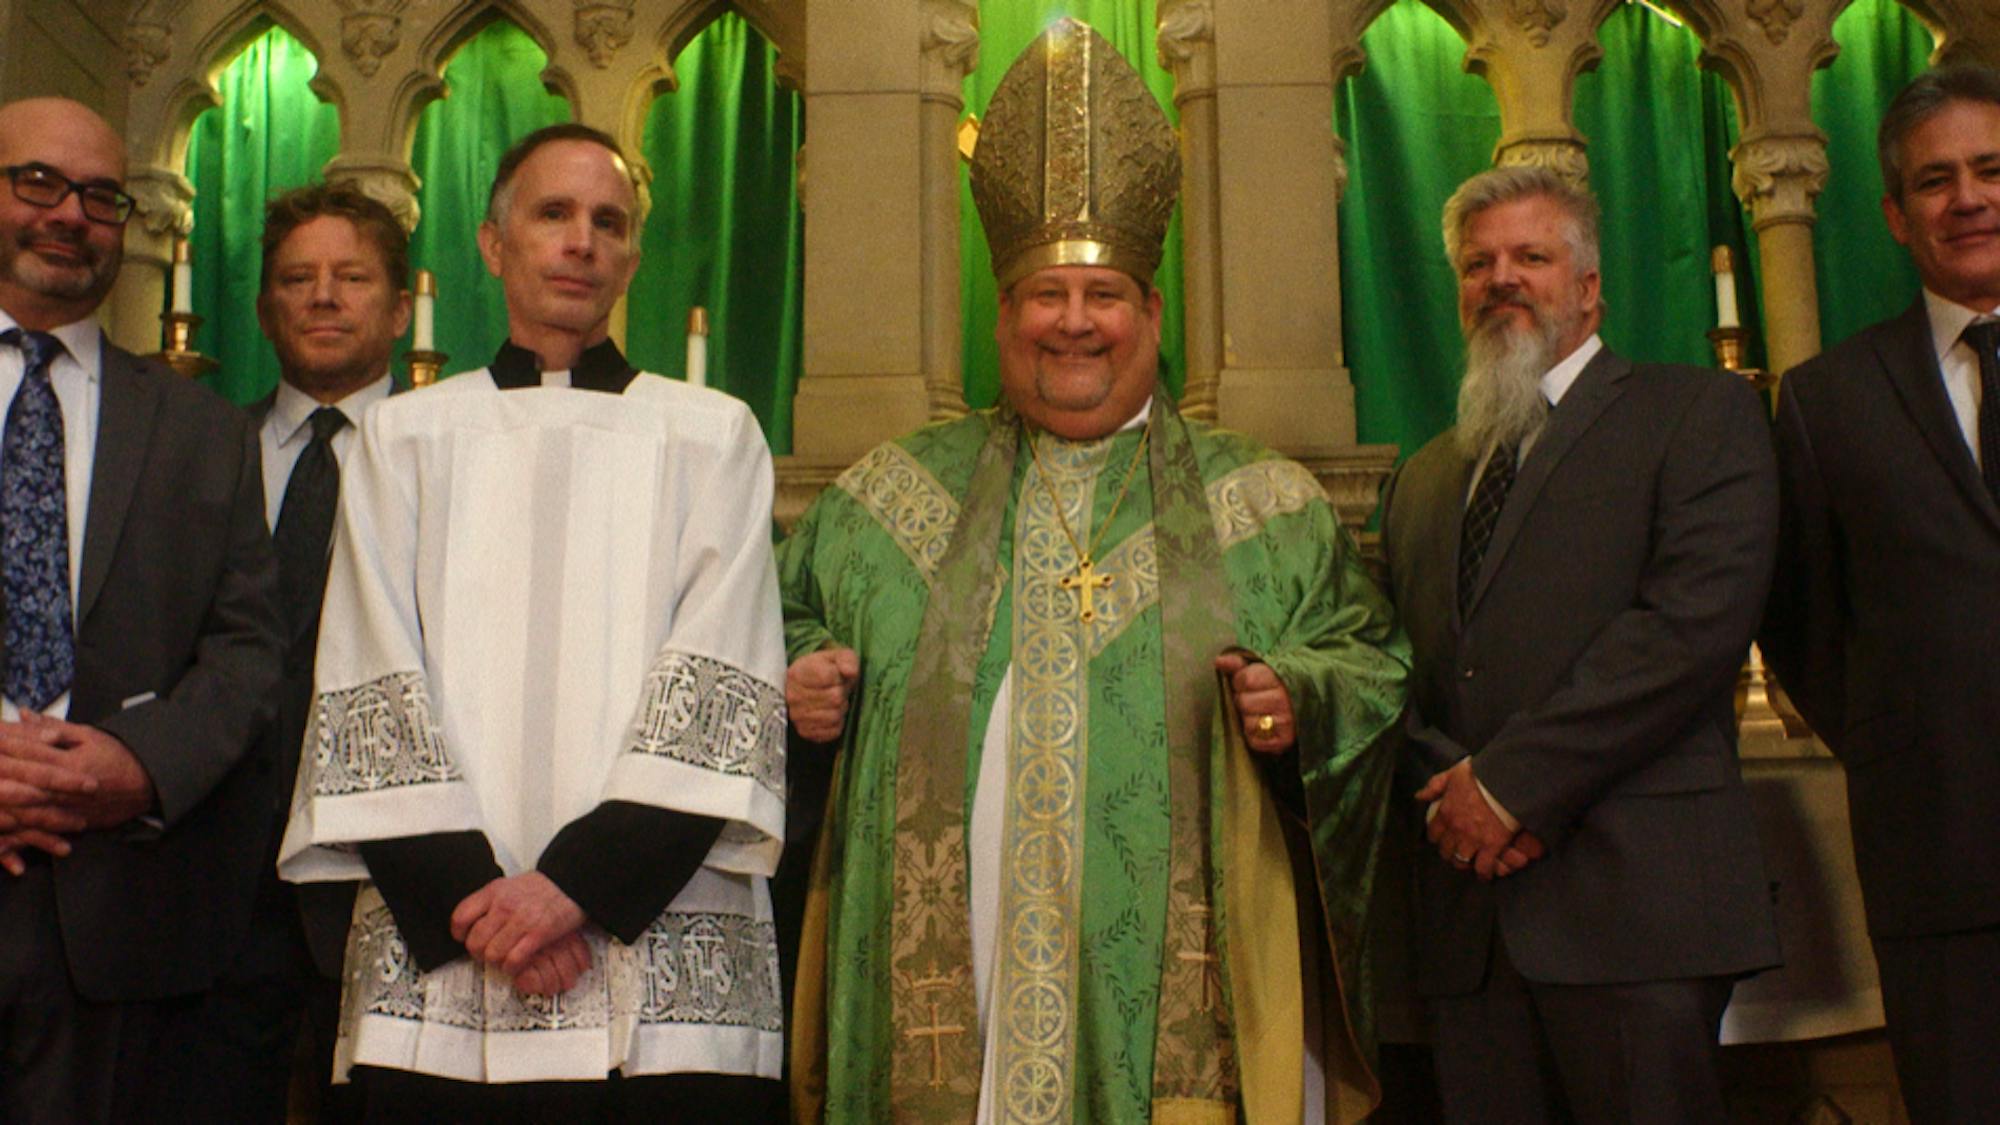 Joe Eldred, Ed Gavagan, Michael Sandridge, Tom Viviano, Dan Laurine, and Mike Forman stand together in a church. Eldred wears a grey suit and thick black glasses, Gavagan wears a dark tie, Sandridge wears a white priest covering and dark clothes underneath, Viviano wears green robes and a bishop hat, Laurine wears a dark suit and has a grey beard.